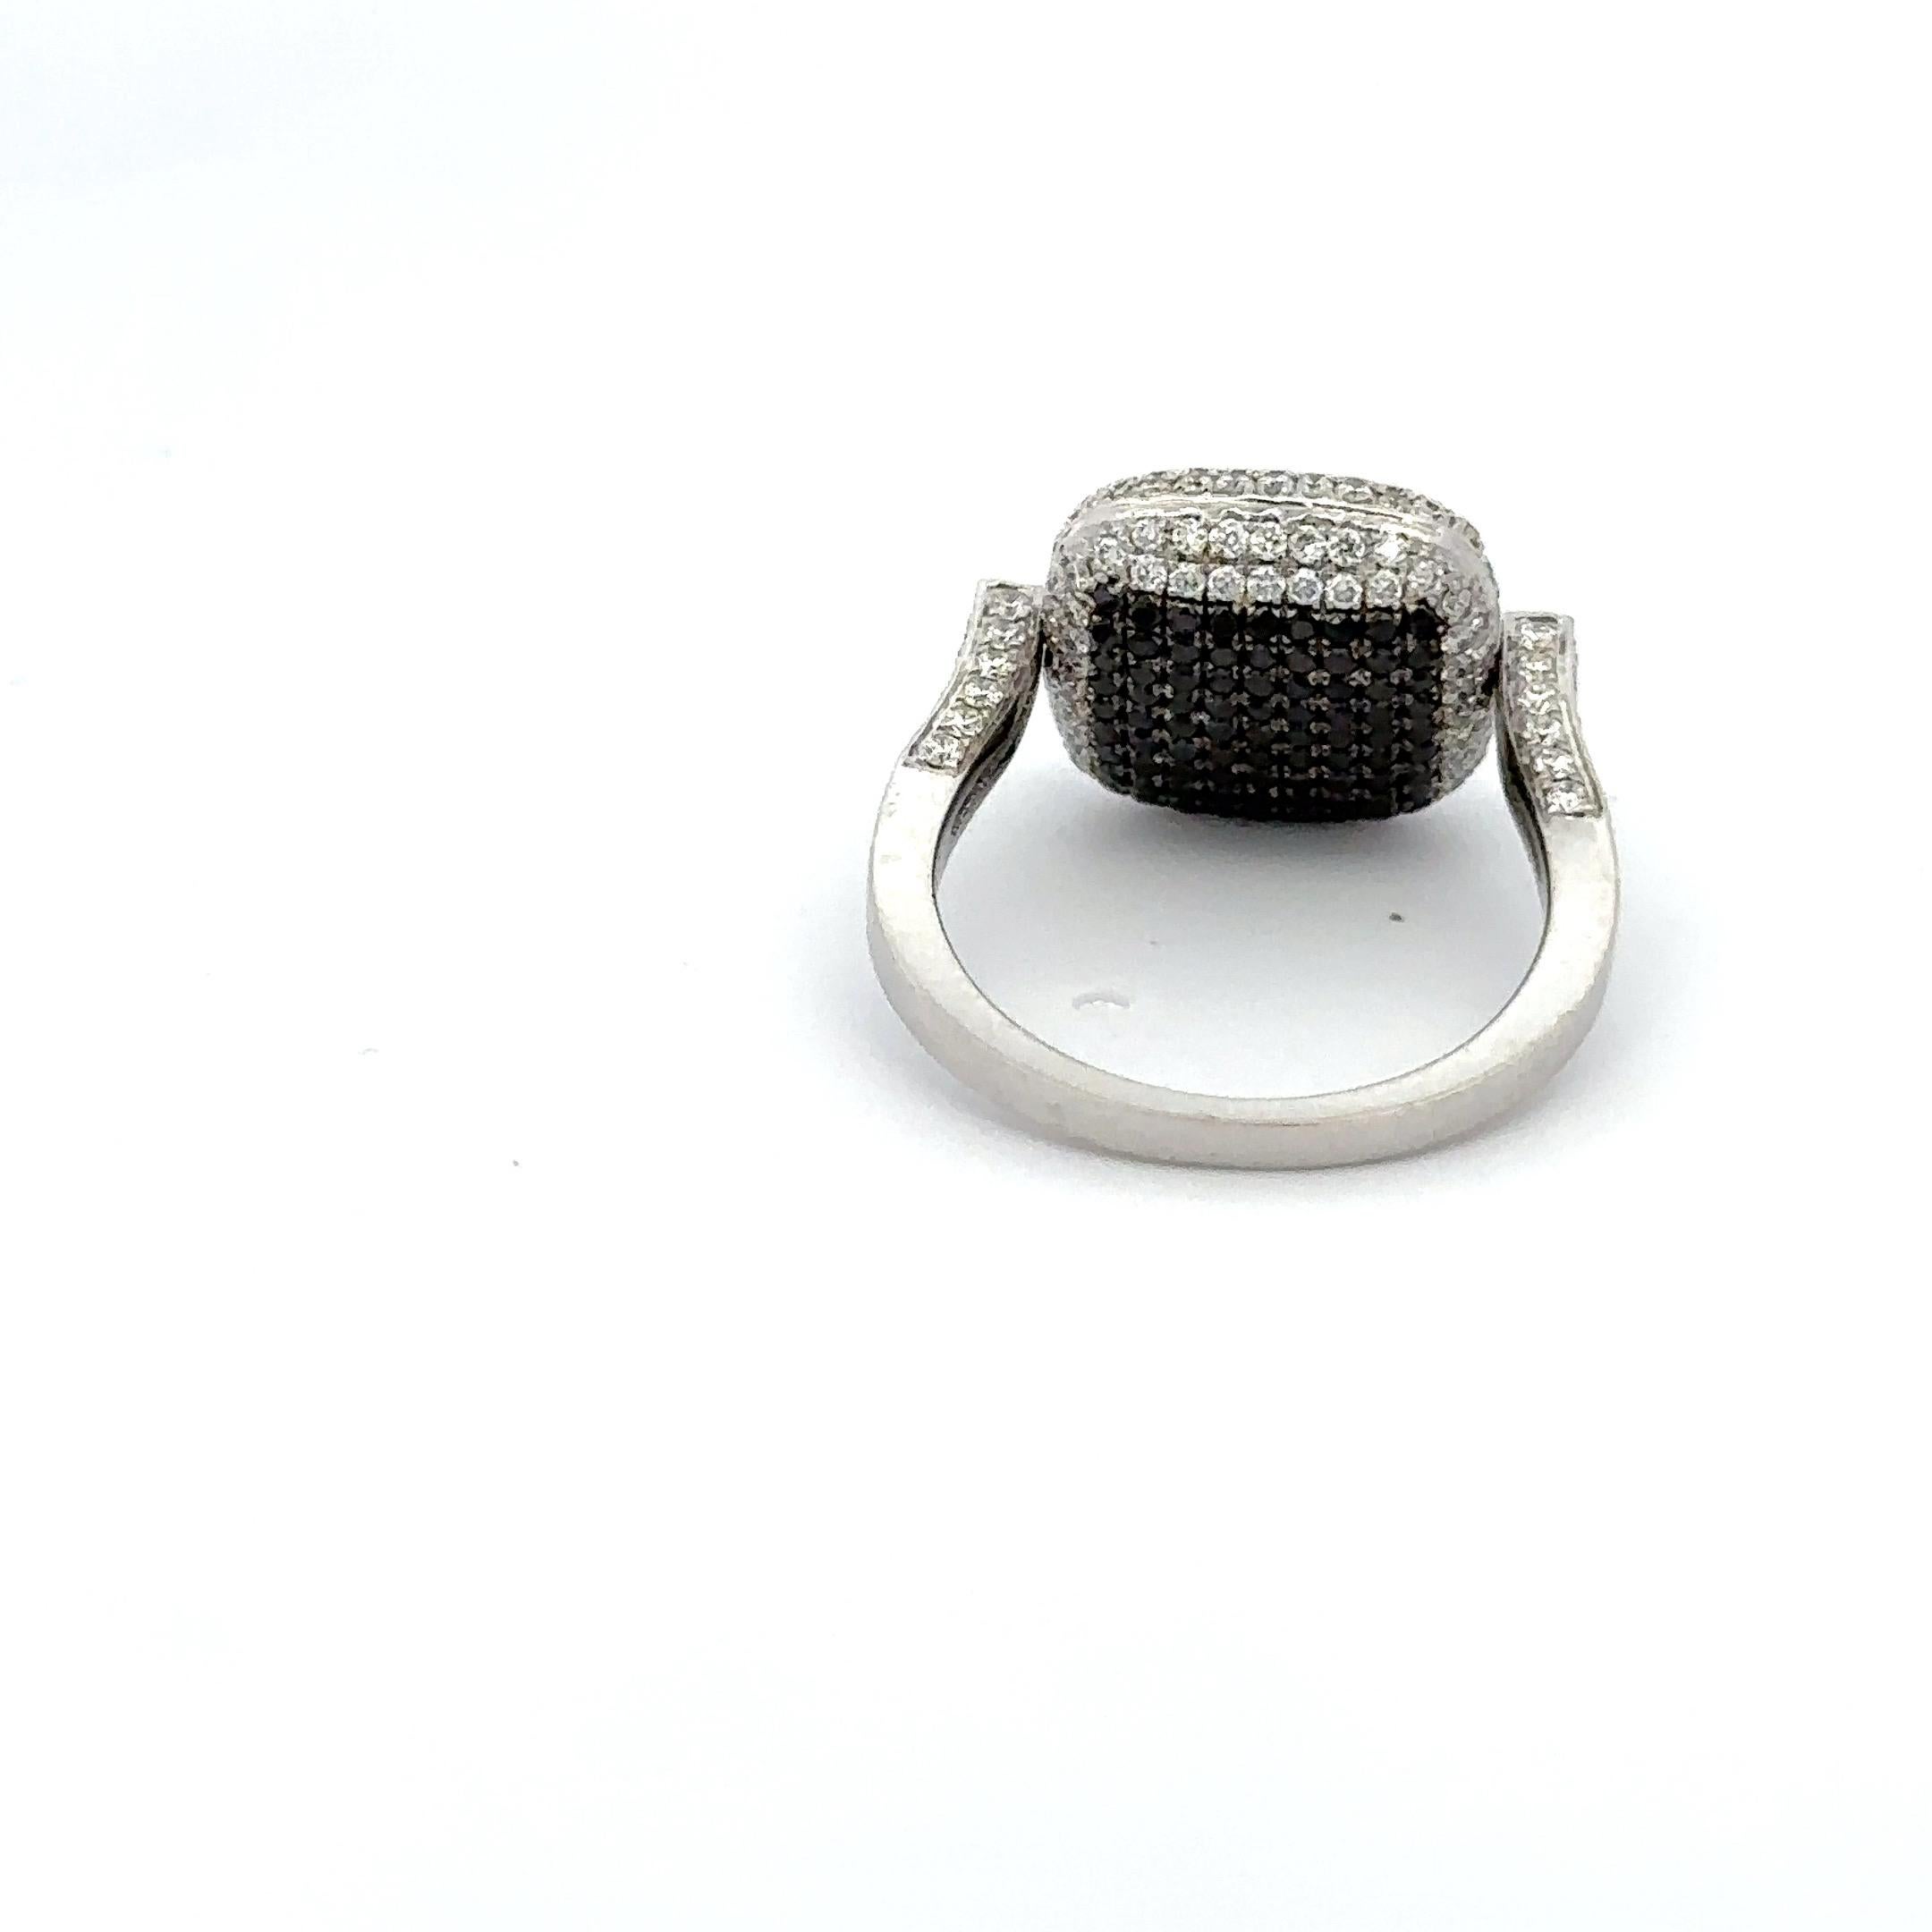 For Sale:  Unique Diamond Flip Ring in 18k Solid White Gold, Fine Jewelry for Him  12